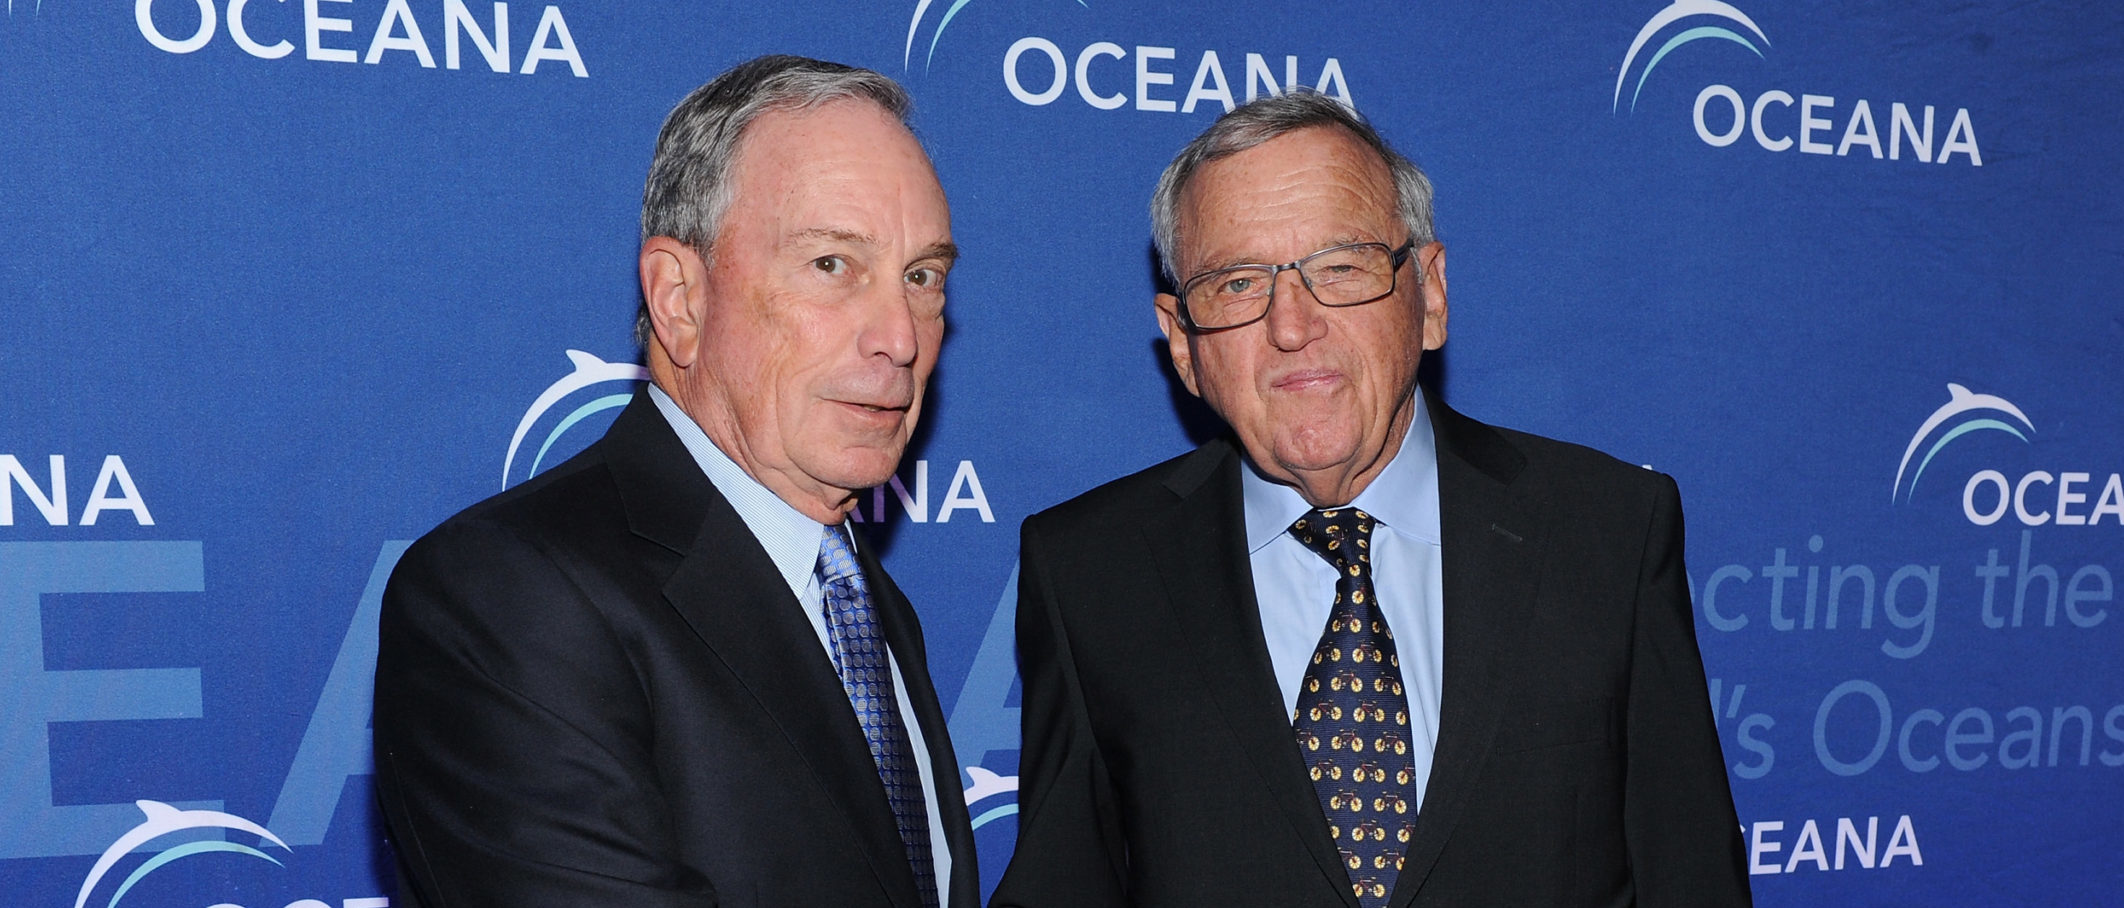 NEW YORK, NY - APRIL 01: Former Mayor of New York City Michael Bloomberg (L) and philanthropist Hansjorg Wyss attend Oceana's 2015 New York City benefit at Four Seasons Restaurant on April 1, 2015 in New York City. (Photo by Craig Barritt/Getty Images for Oceana)